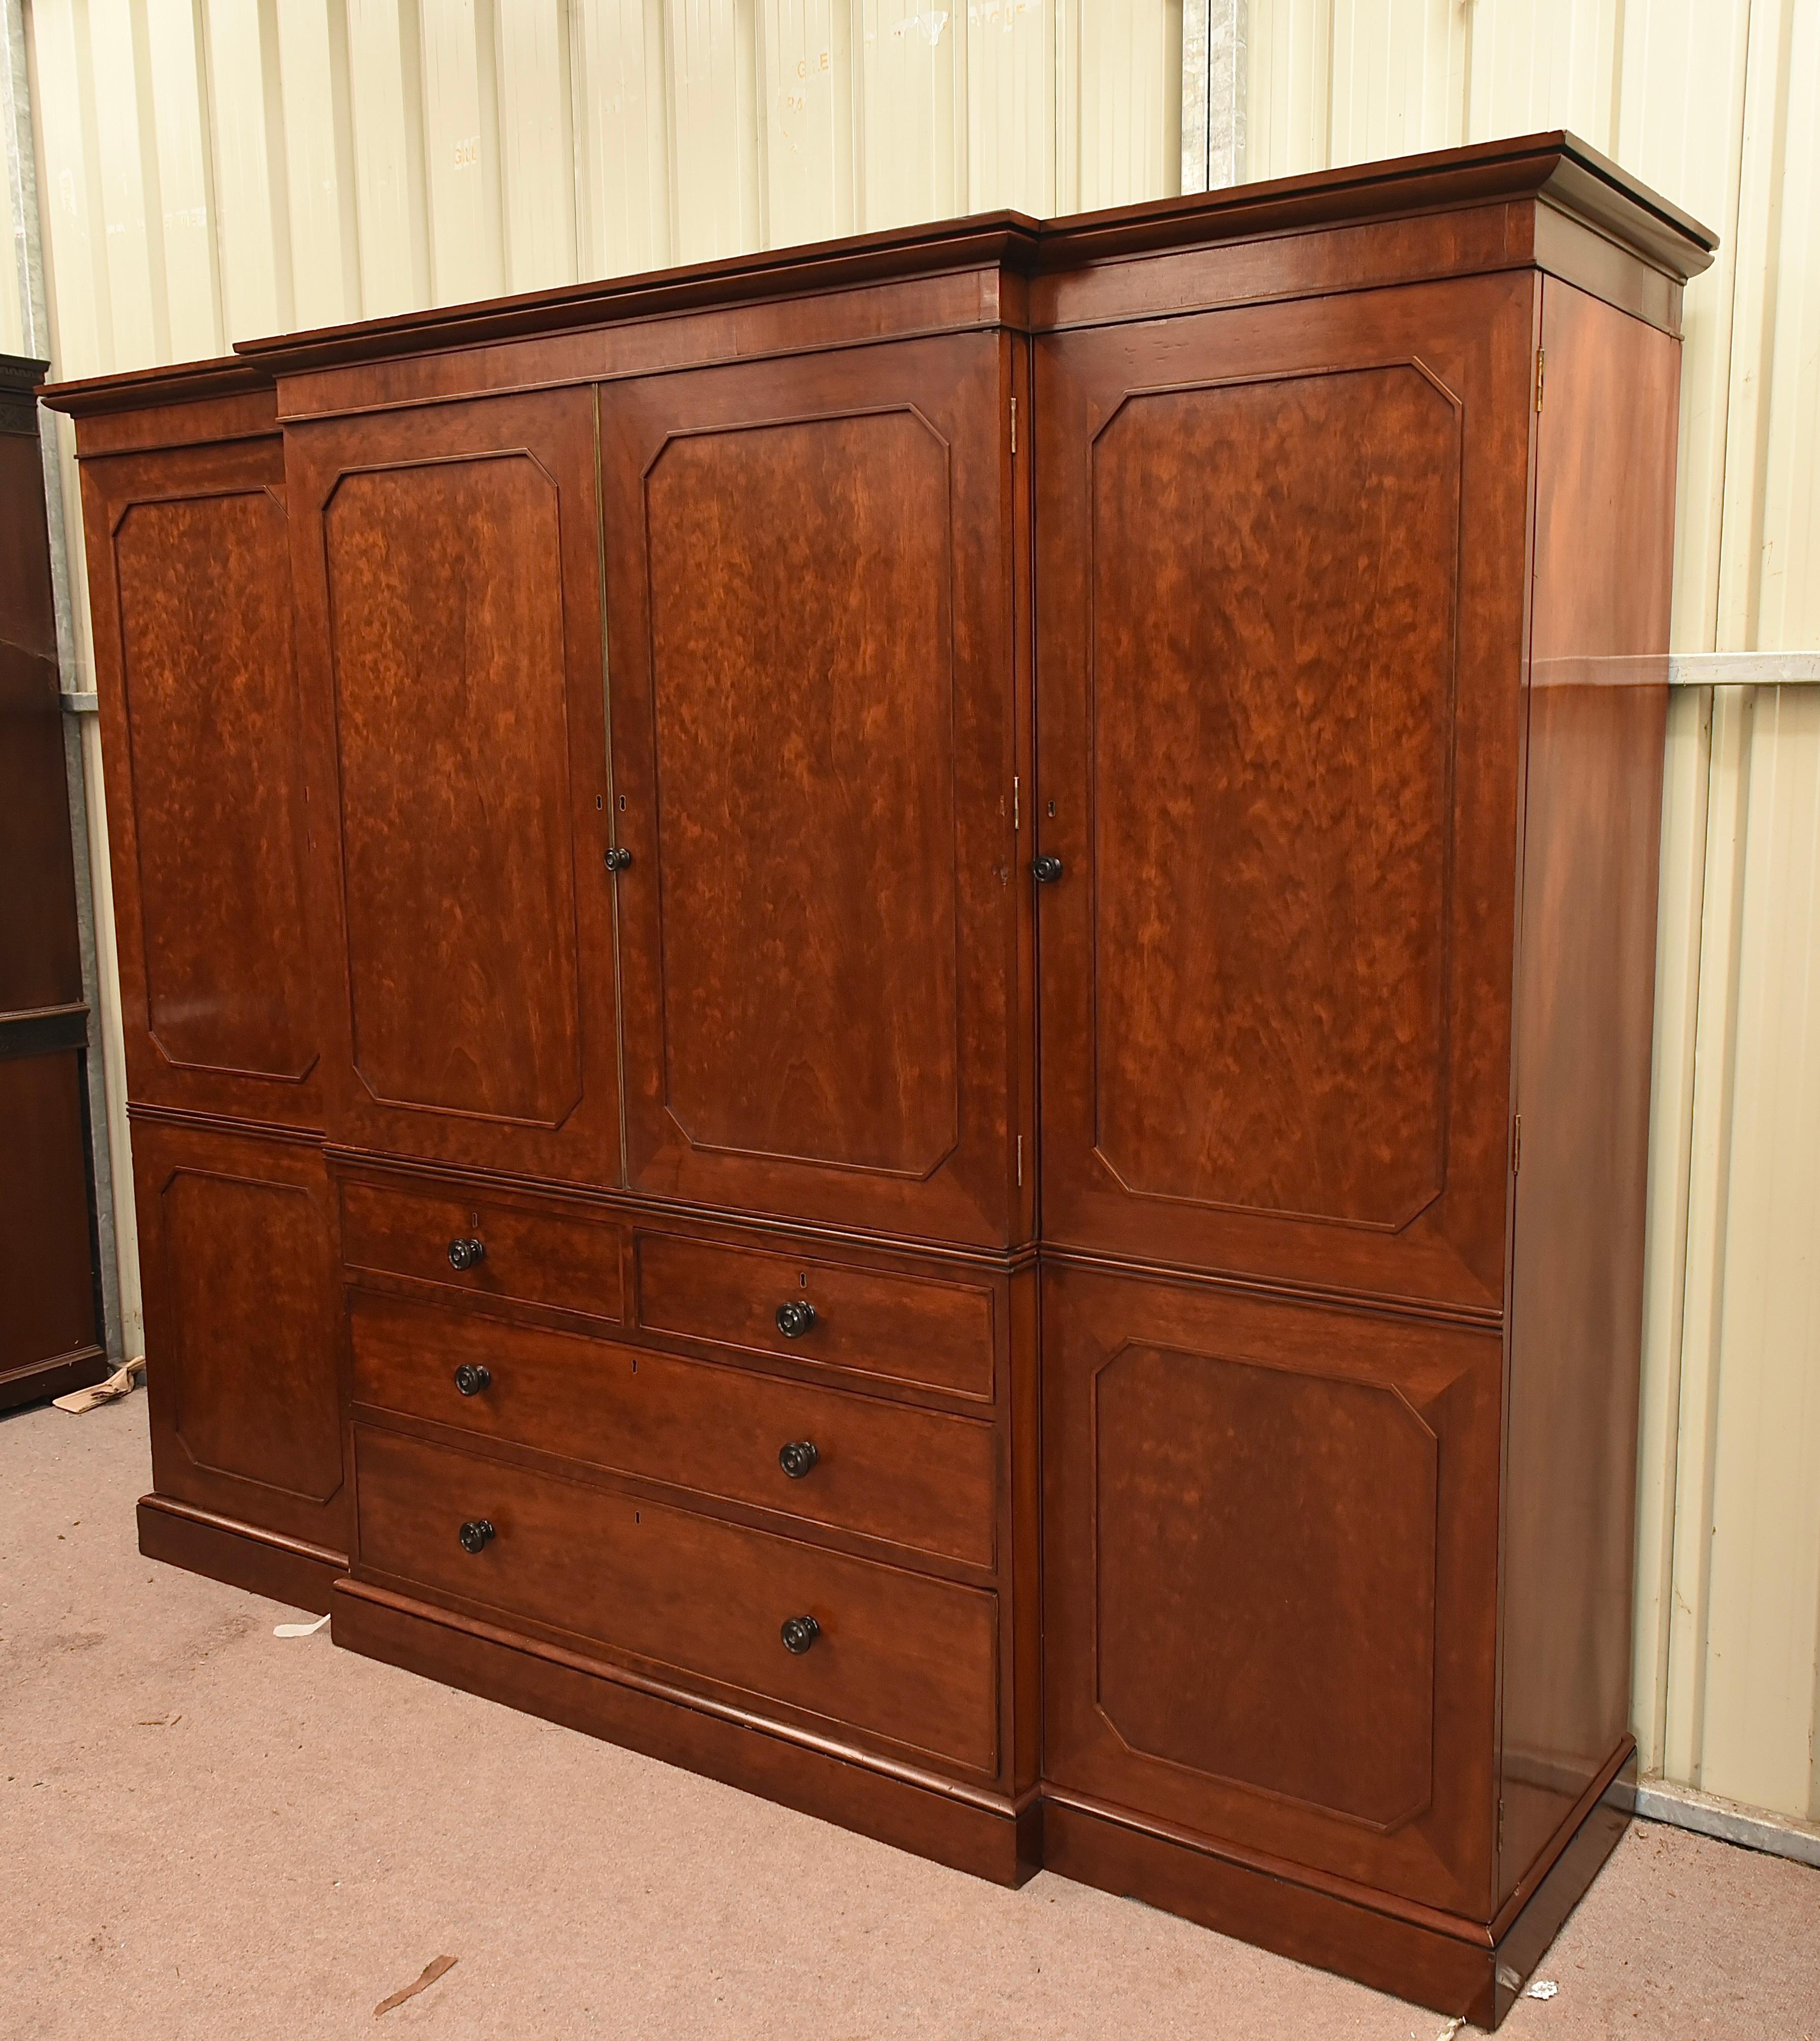 Fantastic large plum pudding mahogany breakfront compactum wardrobe attributed to Gillow 
The wardrobe is fine quality with with good figuring and a great colour .
It has a fully fitted centre with slide out linen trays with two small over two large